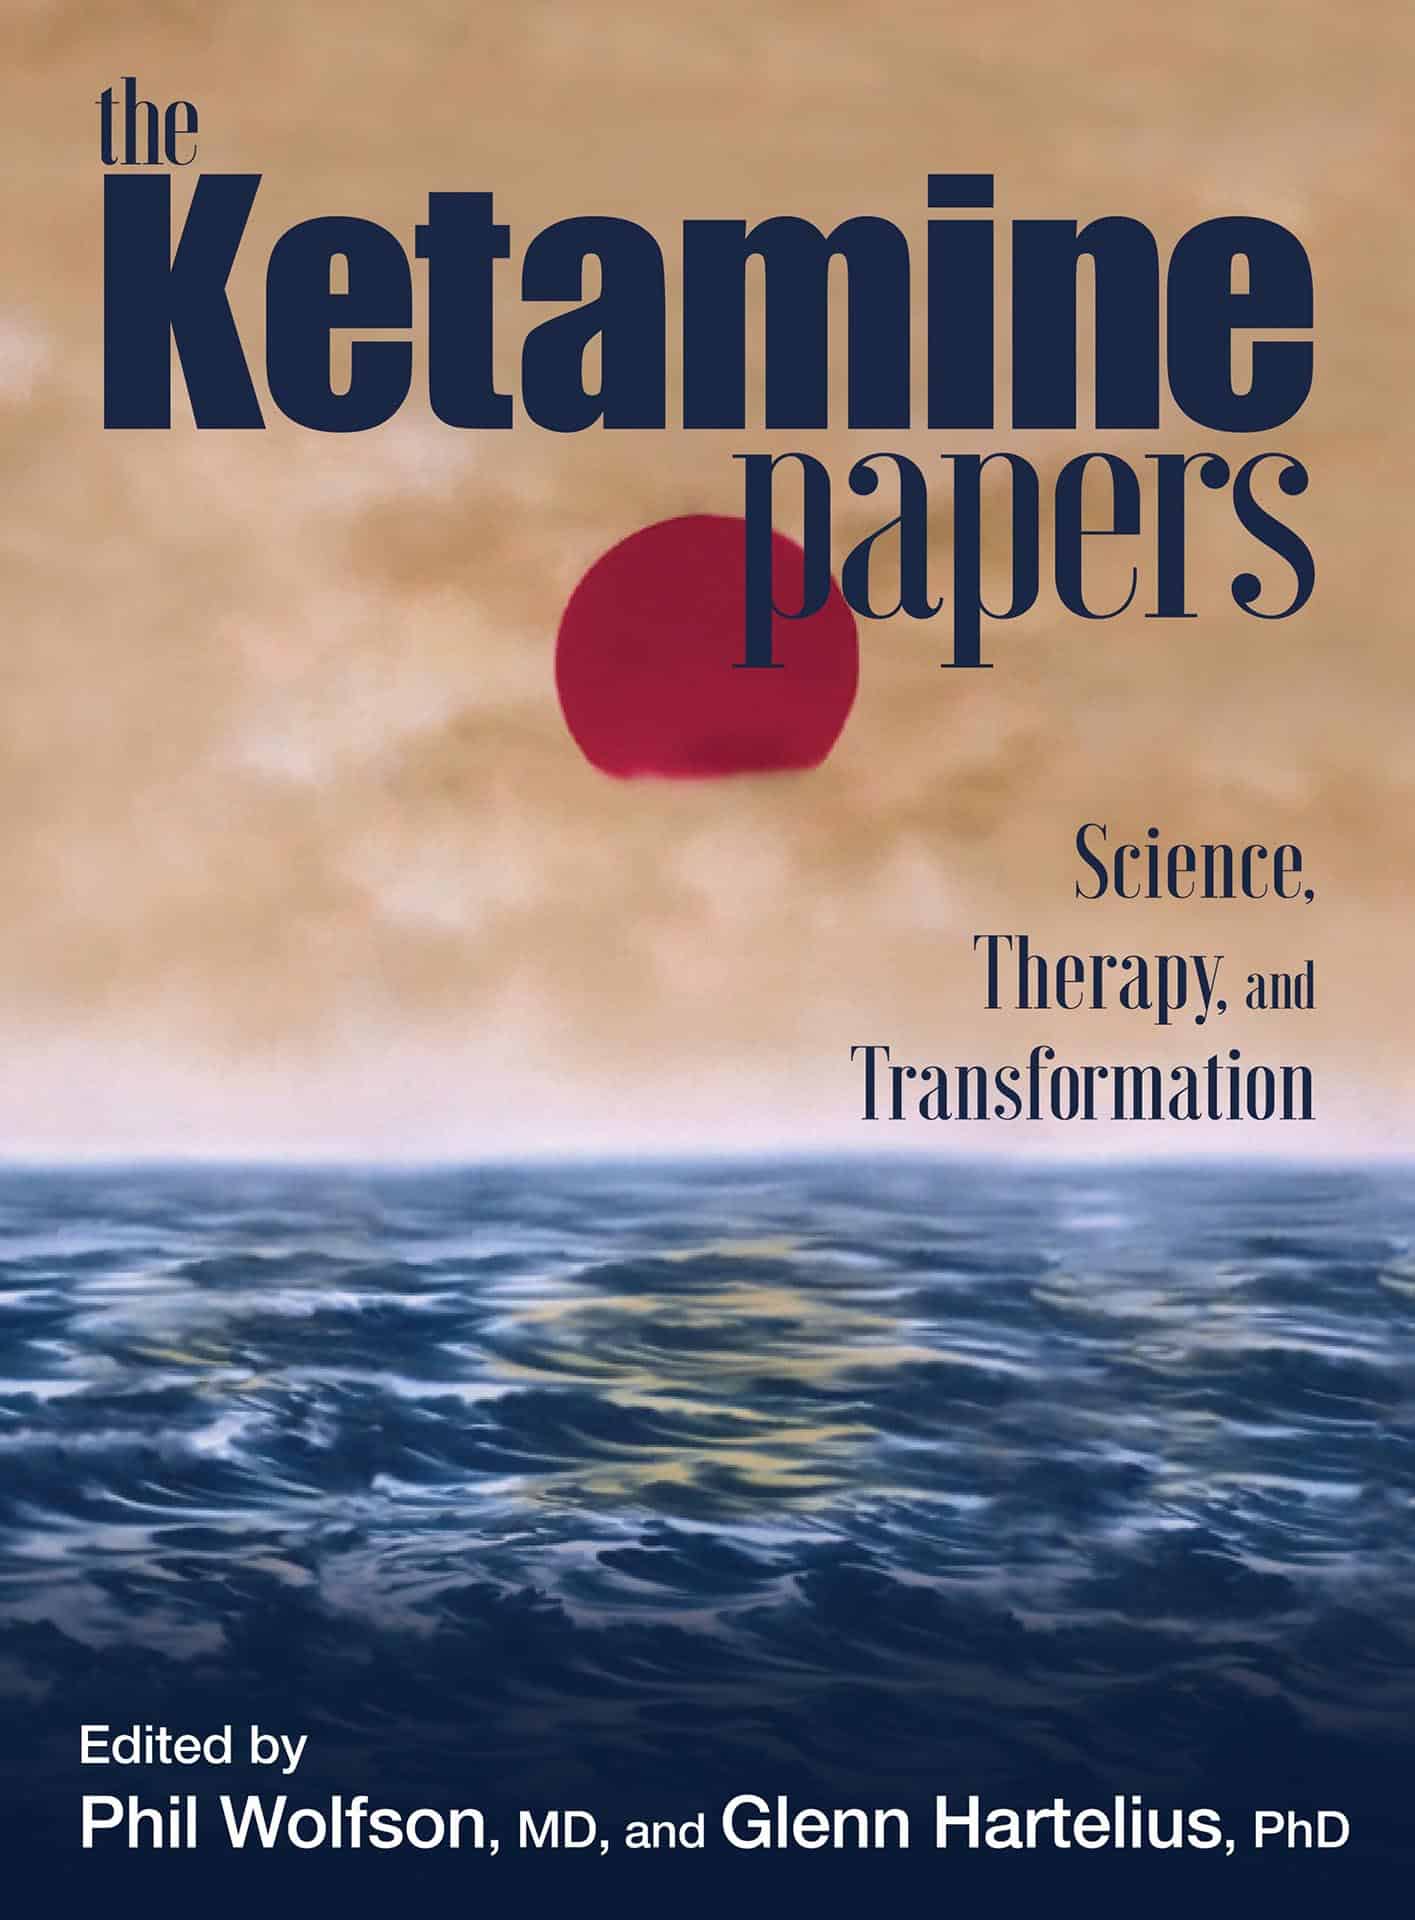 The Ketamine Papers: Science, Therapy, and Transformation